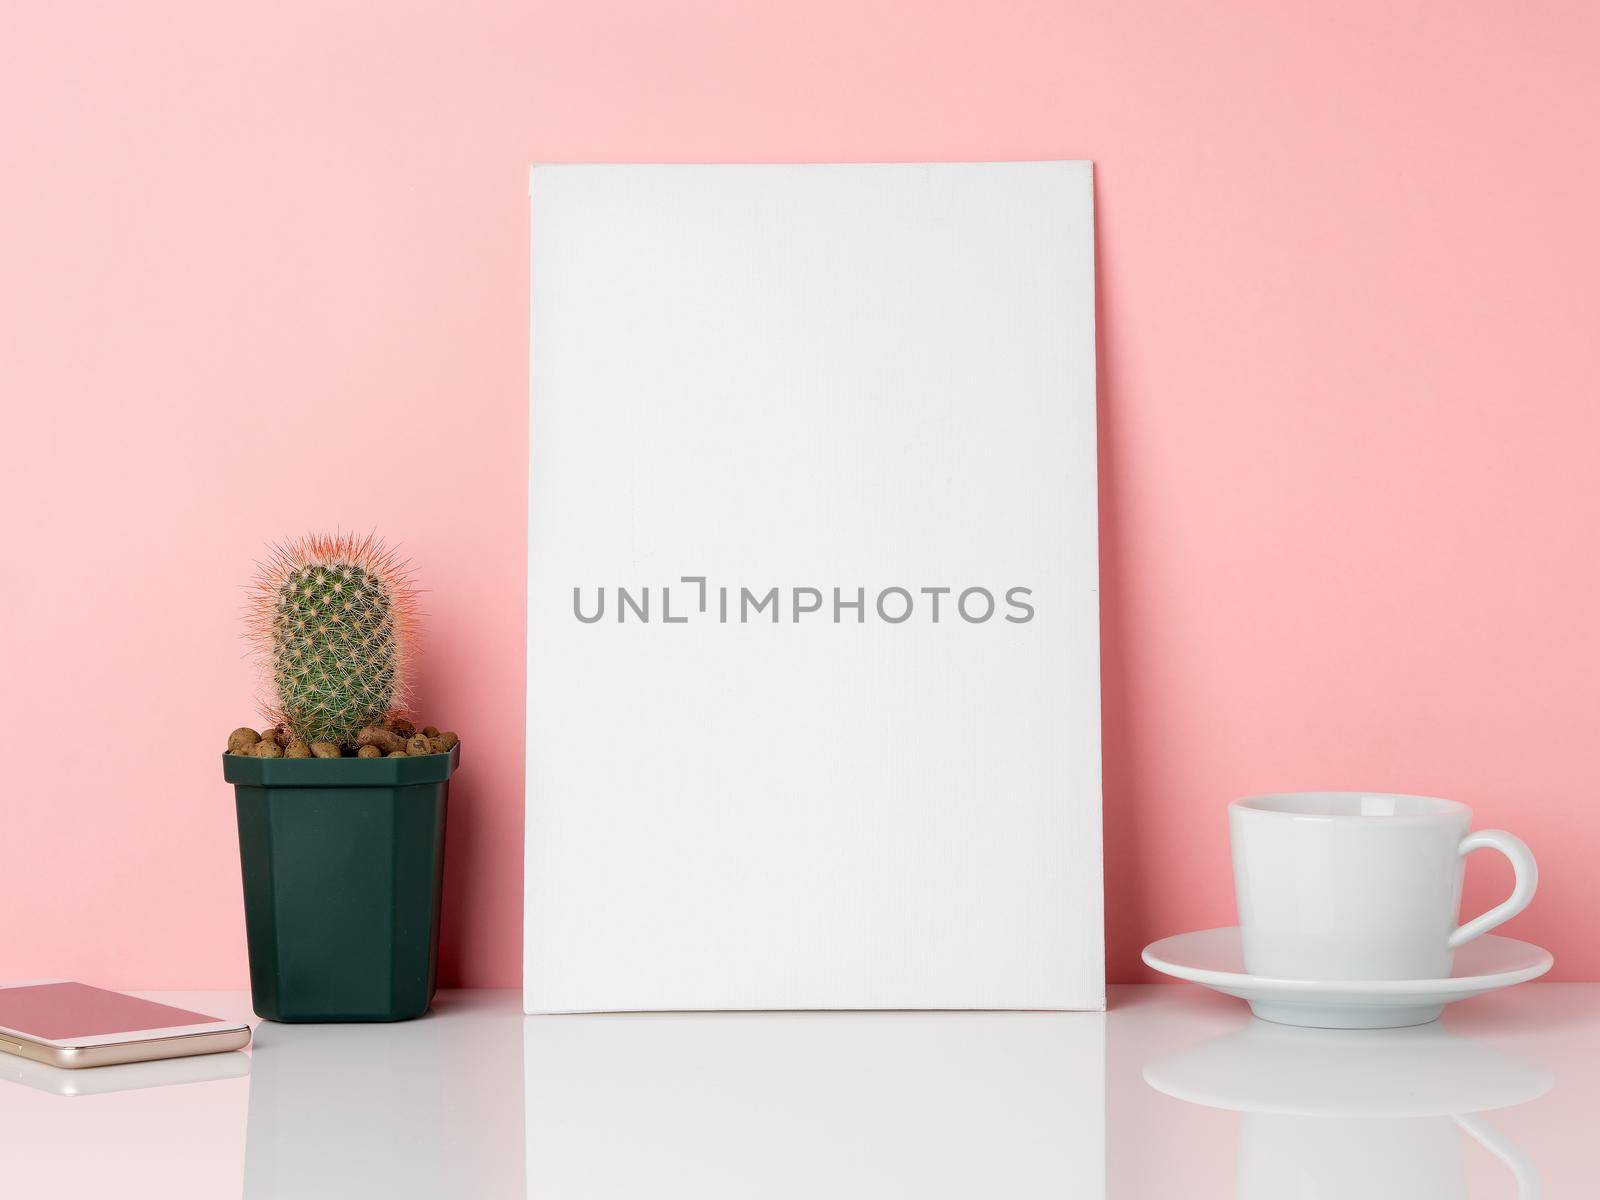 Blank white frame and plant cactus, cup of coffee or tea on a white table against the pink wall with copy space. Mockup with copy space. by NataBene